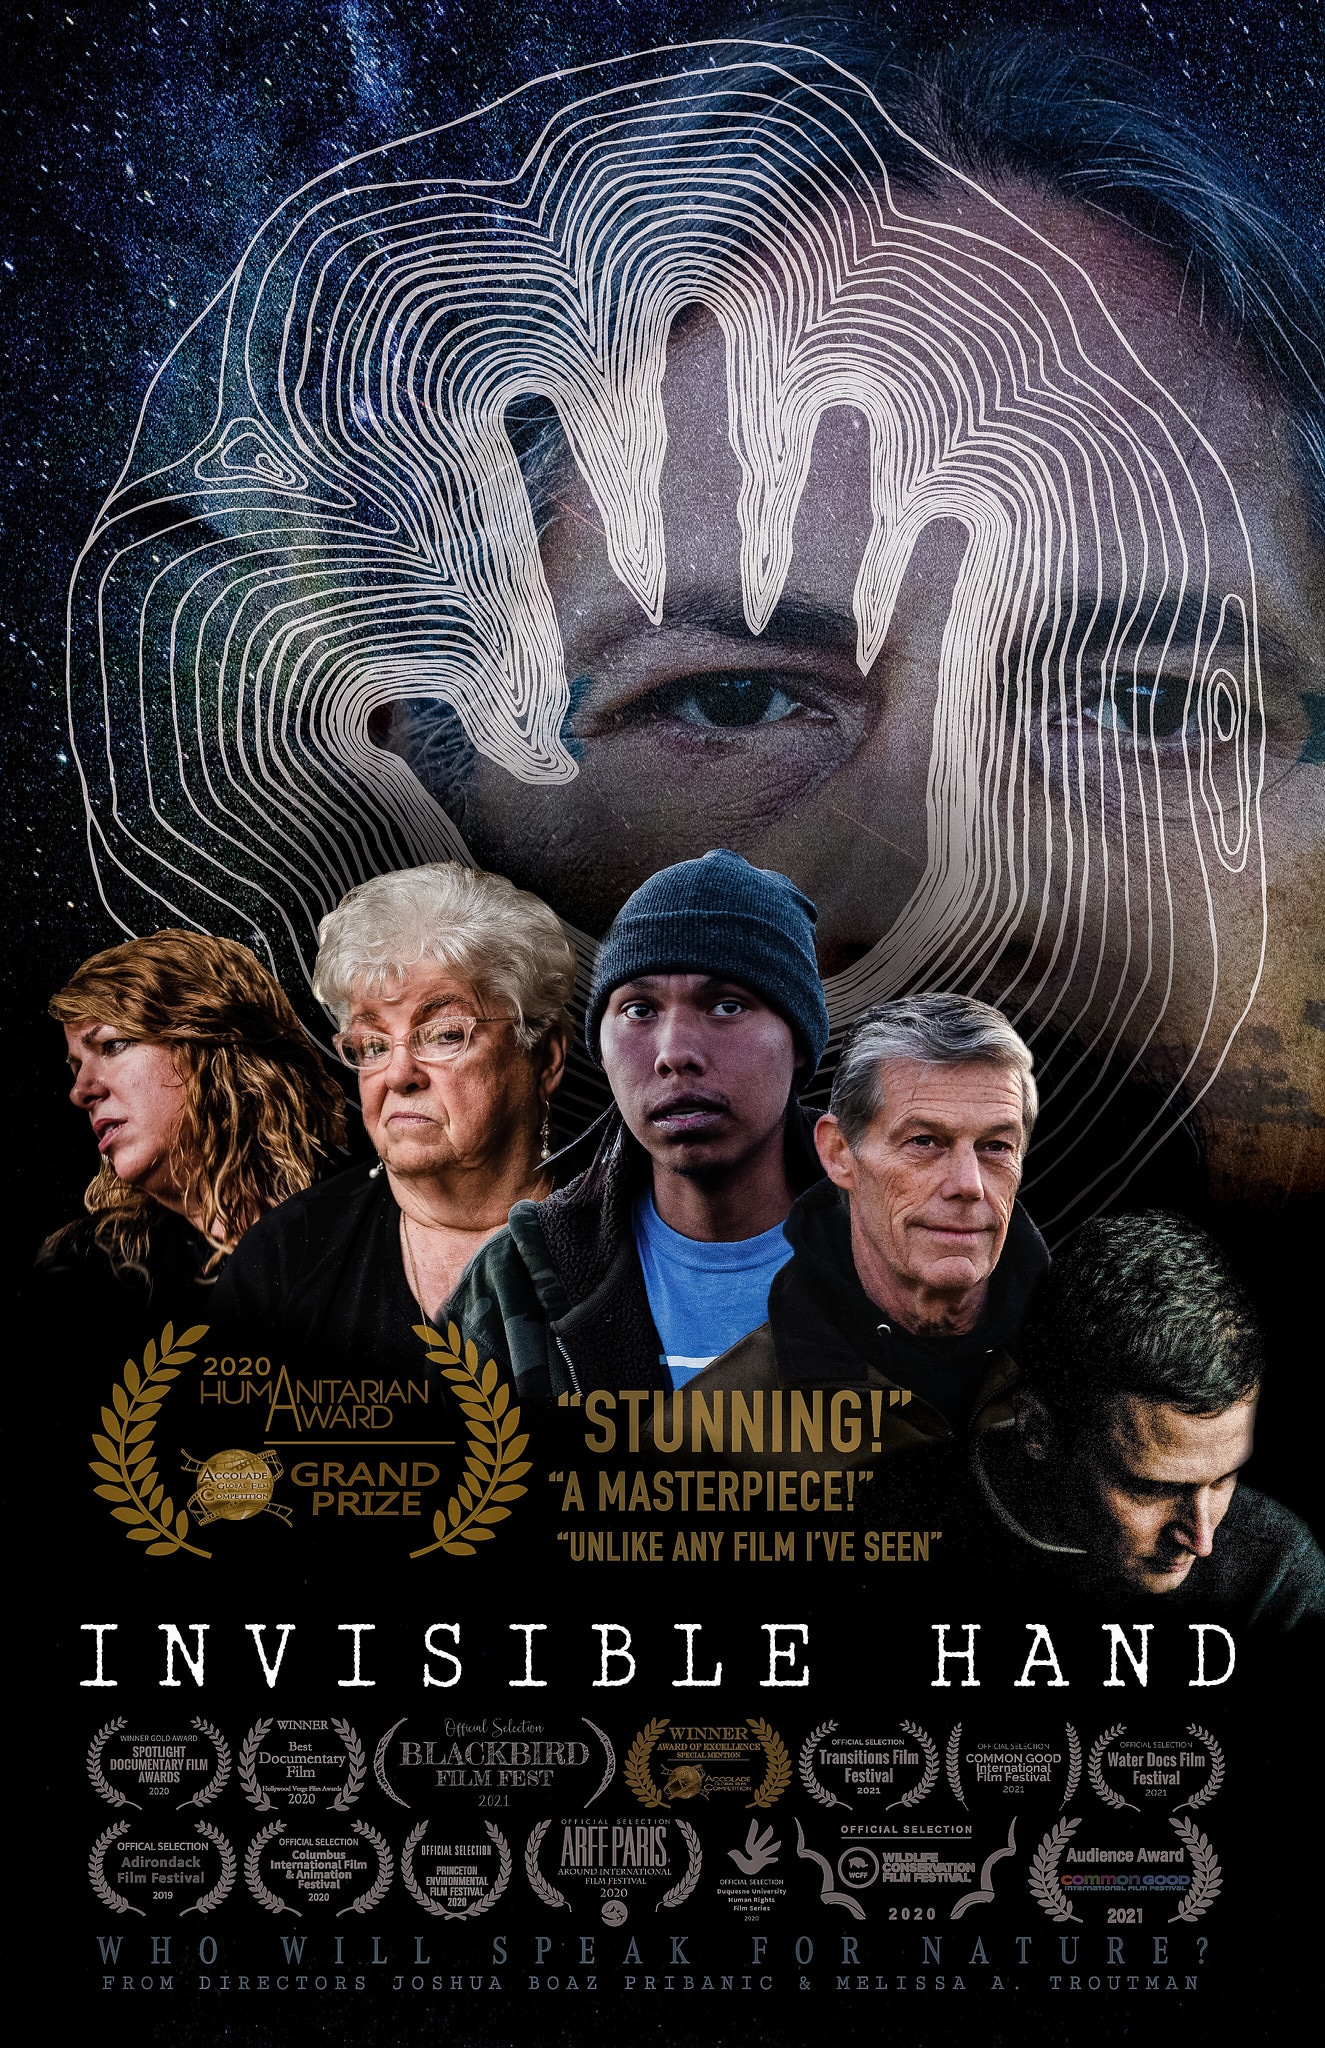 Rights of Nature INVISIBLE HAND | Mark Ruffalo Tickets